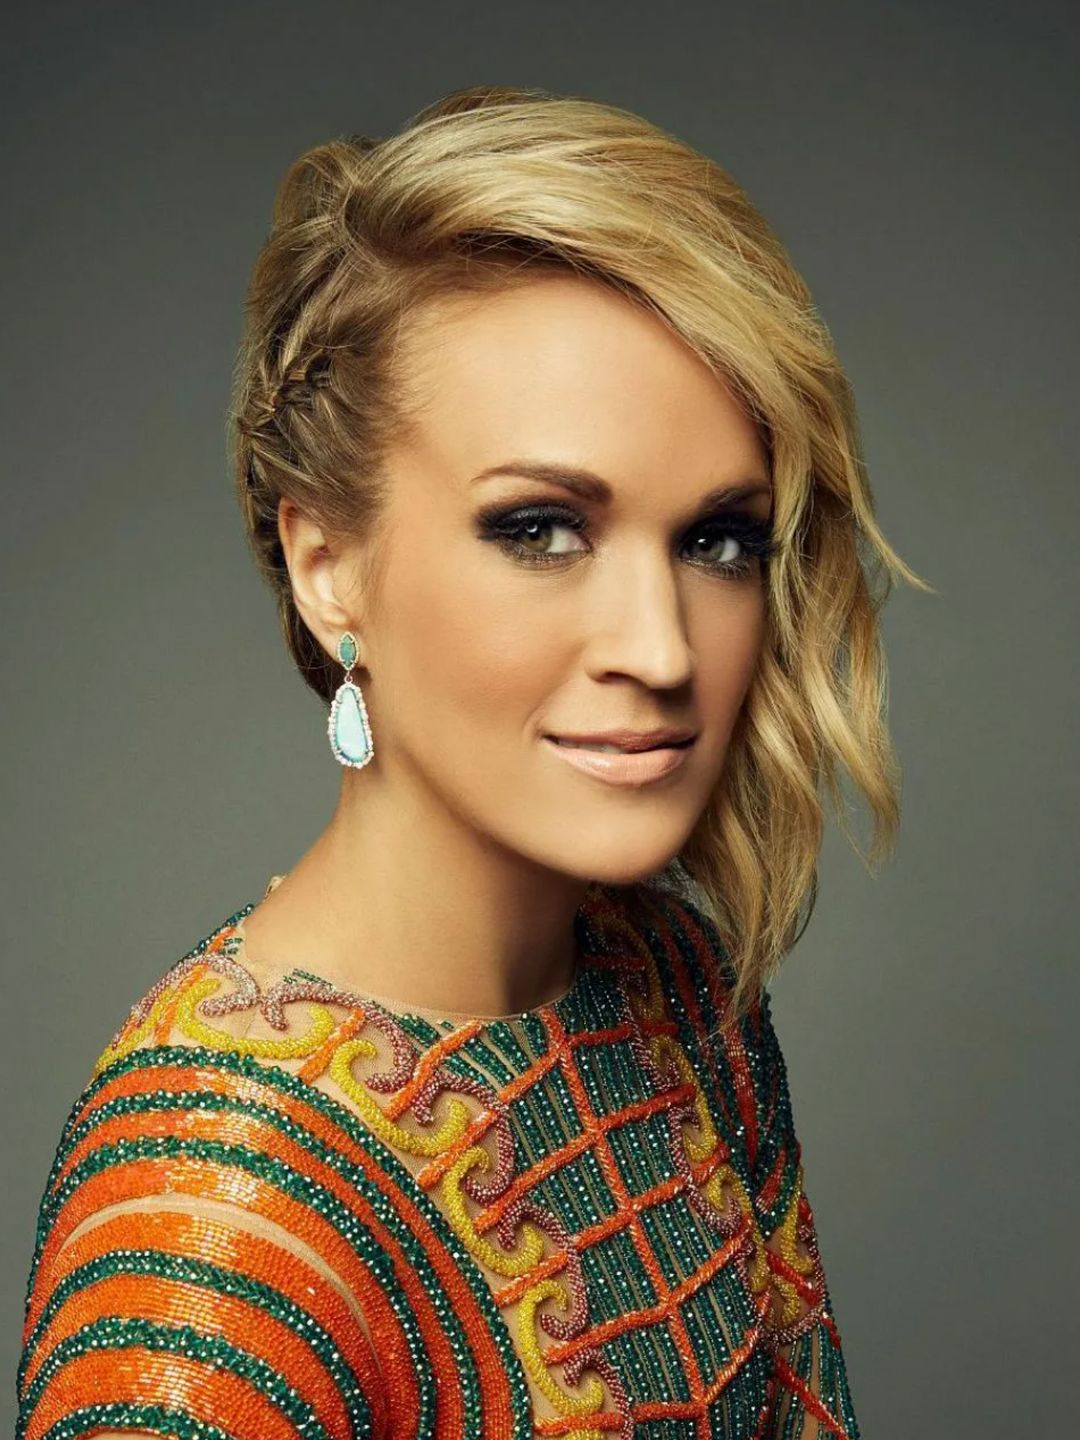 Carrie Underwood early life